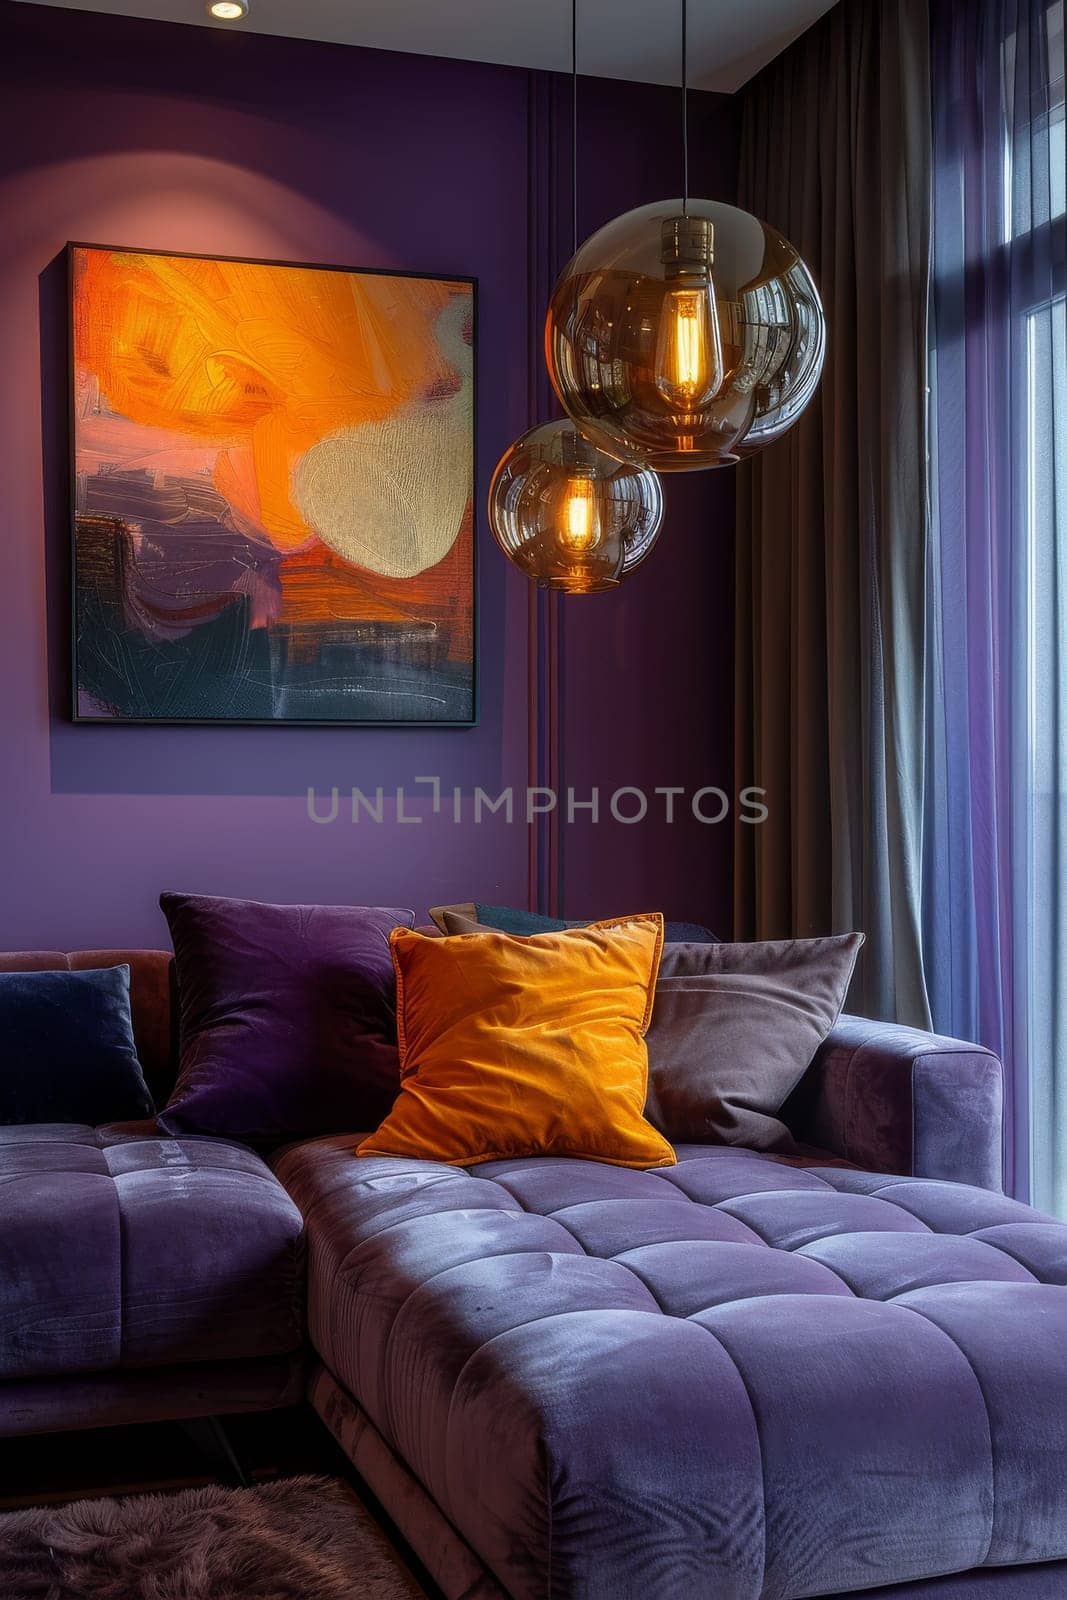 A purple couch with pillows and a painting on the wall. The couch is covered in purple velvet and has a large pillow on it. The painting on the wall is abstract and colorful